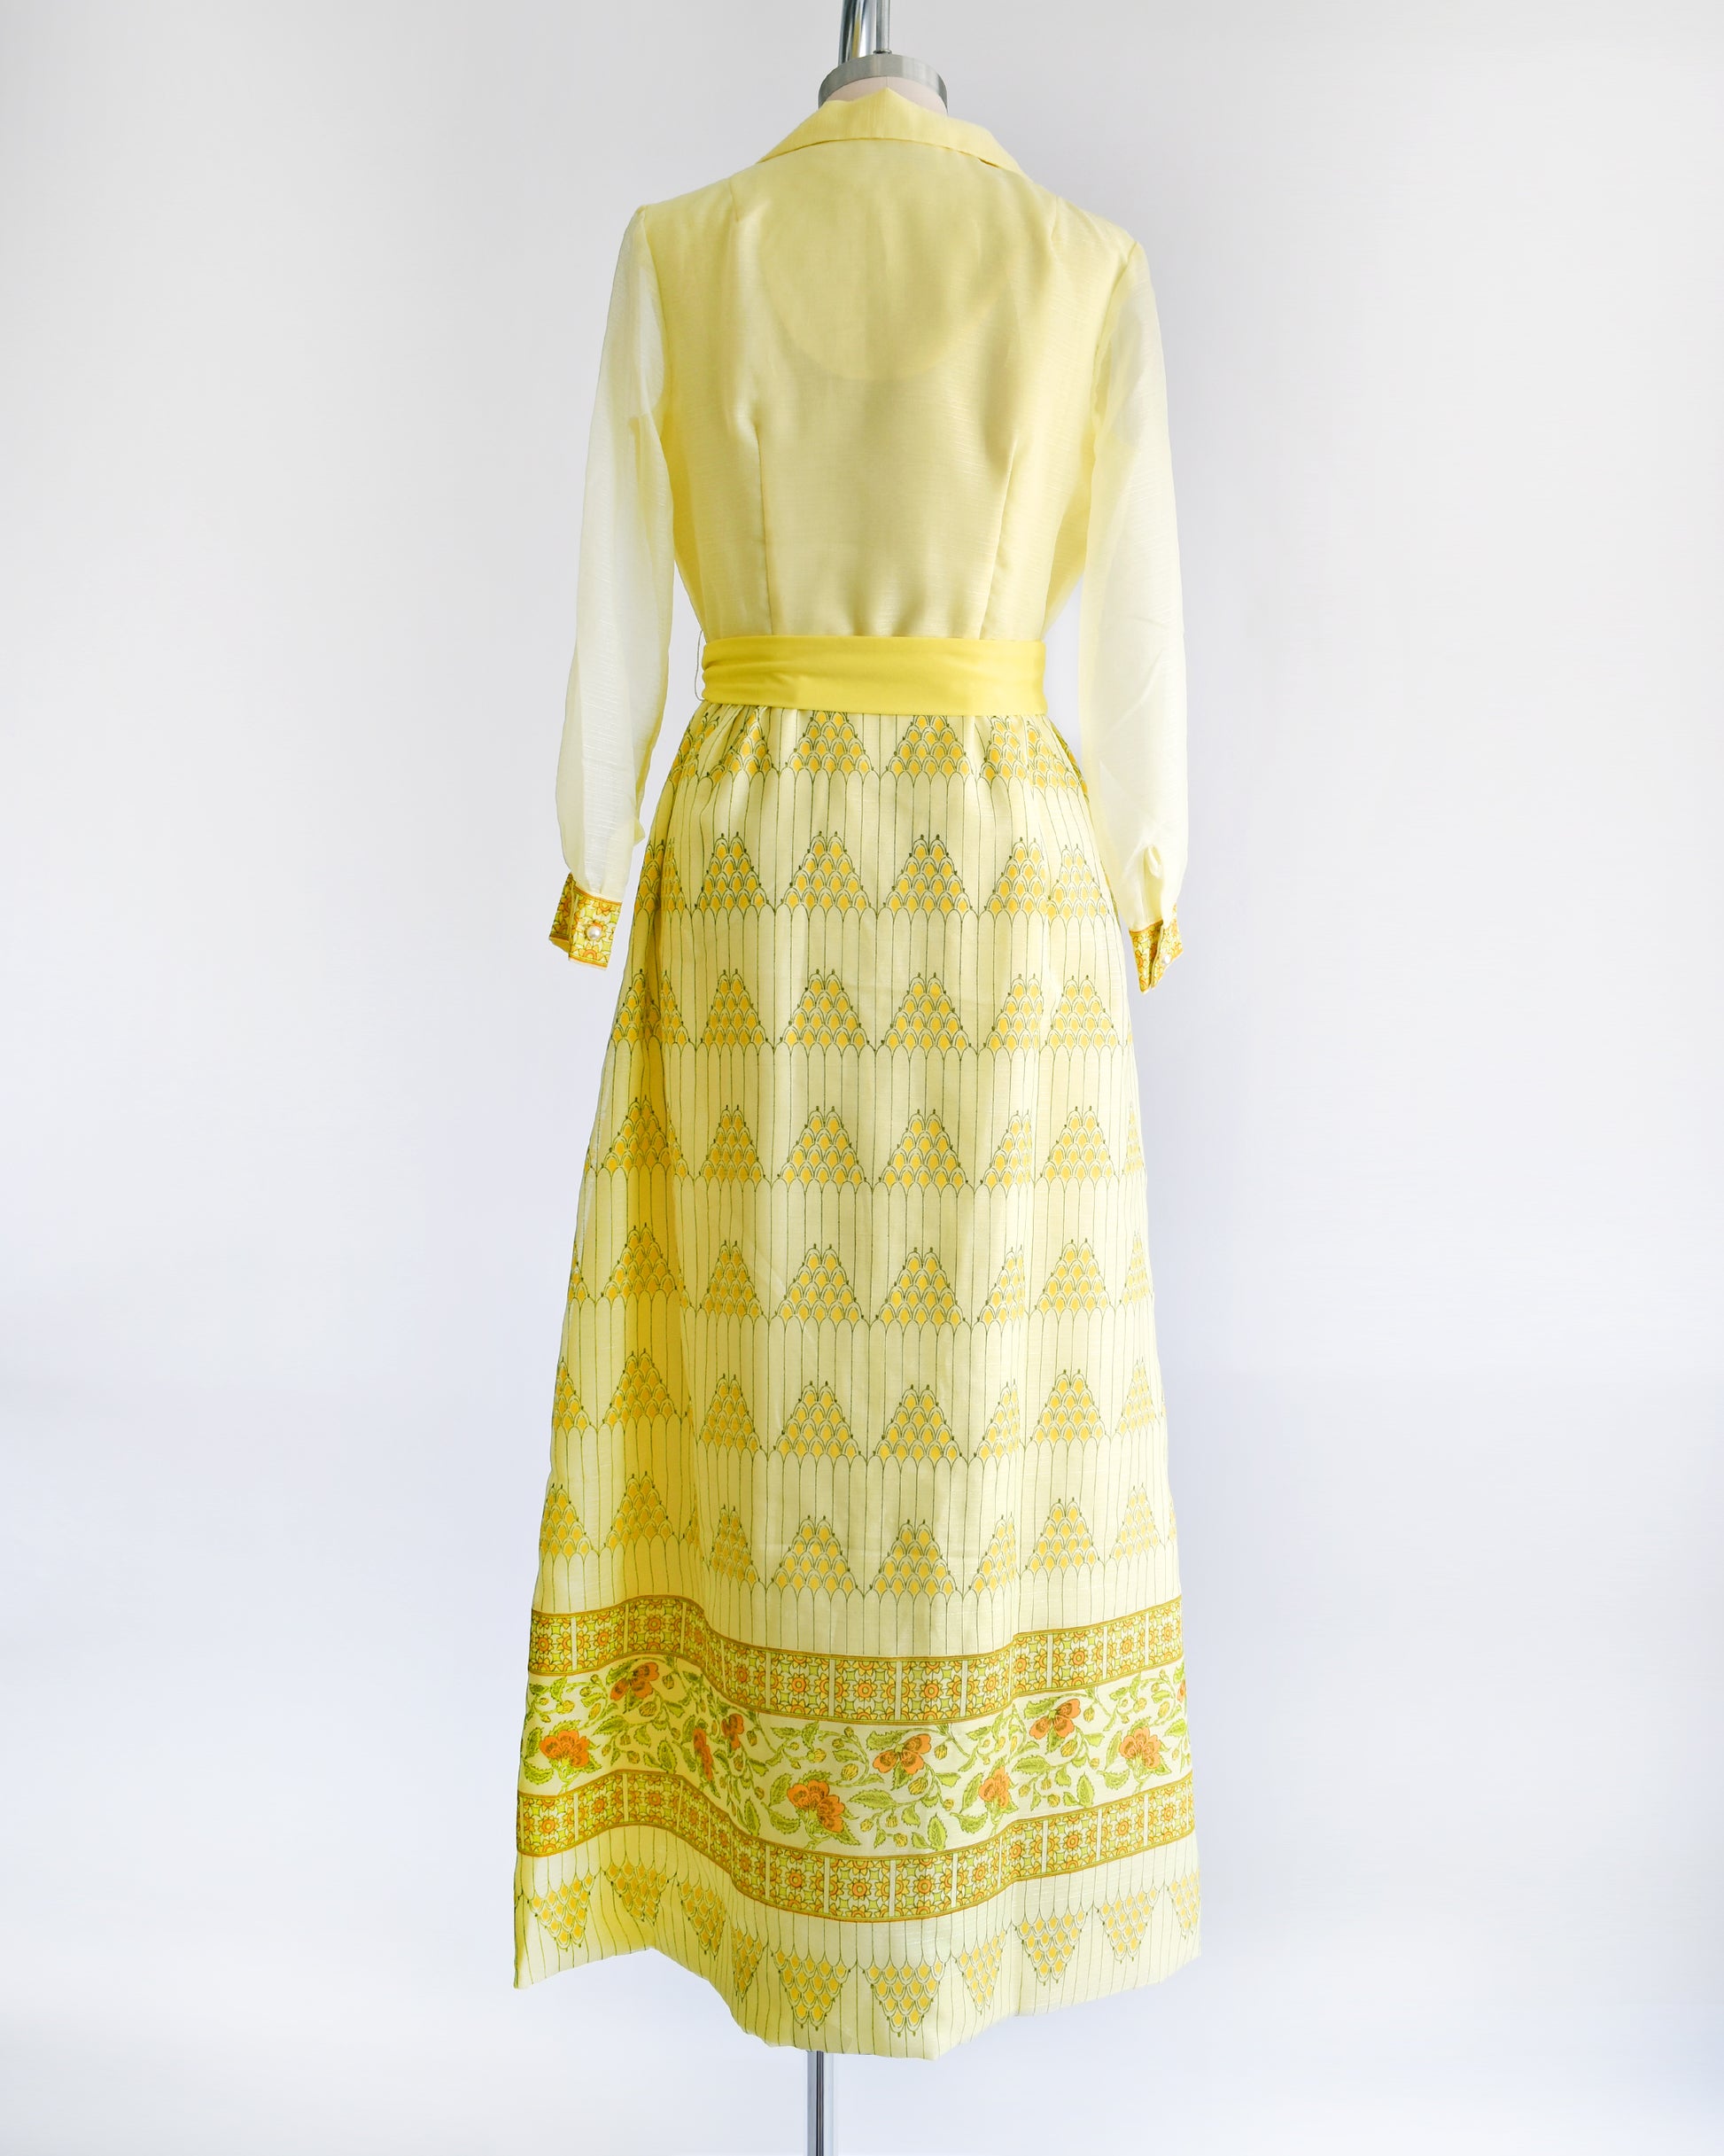 Back view of a yellow vintage maxi dress on a dress form. The dress features a collared neckline, semi sheer long sleeves, button down front, yellow sash belt, and a maxi skirt that has a pyramid and floral print.